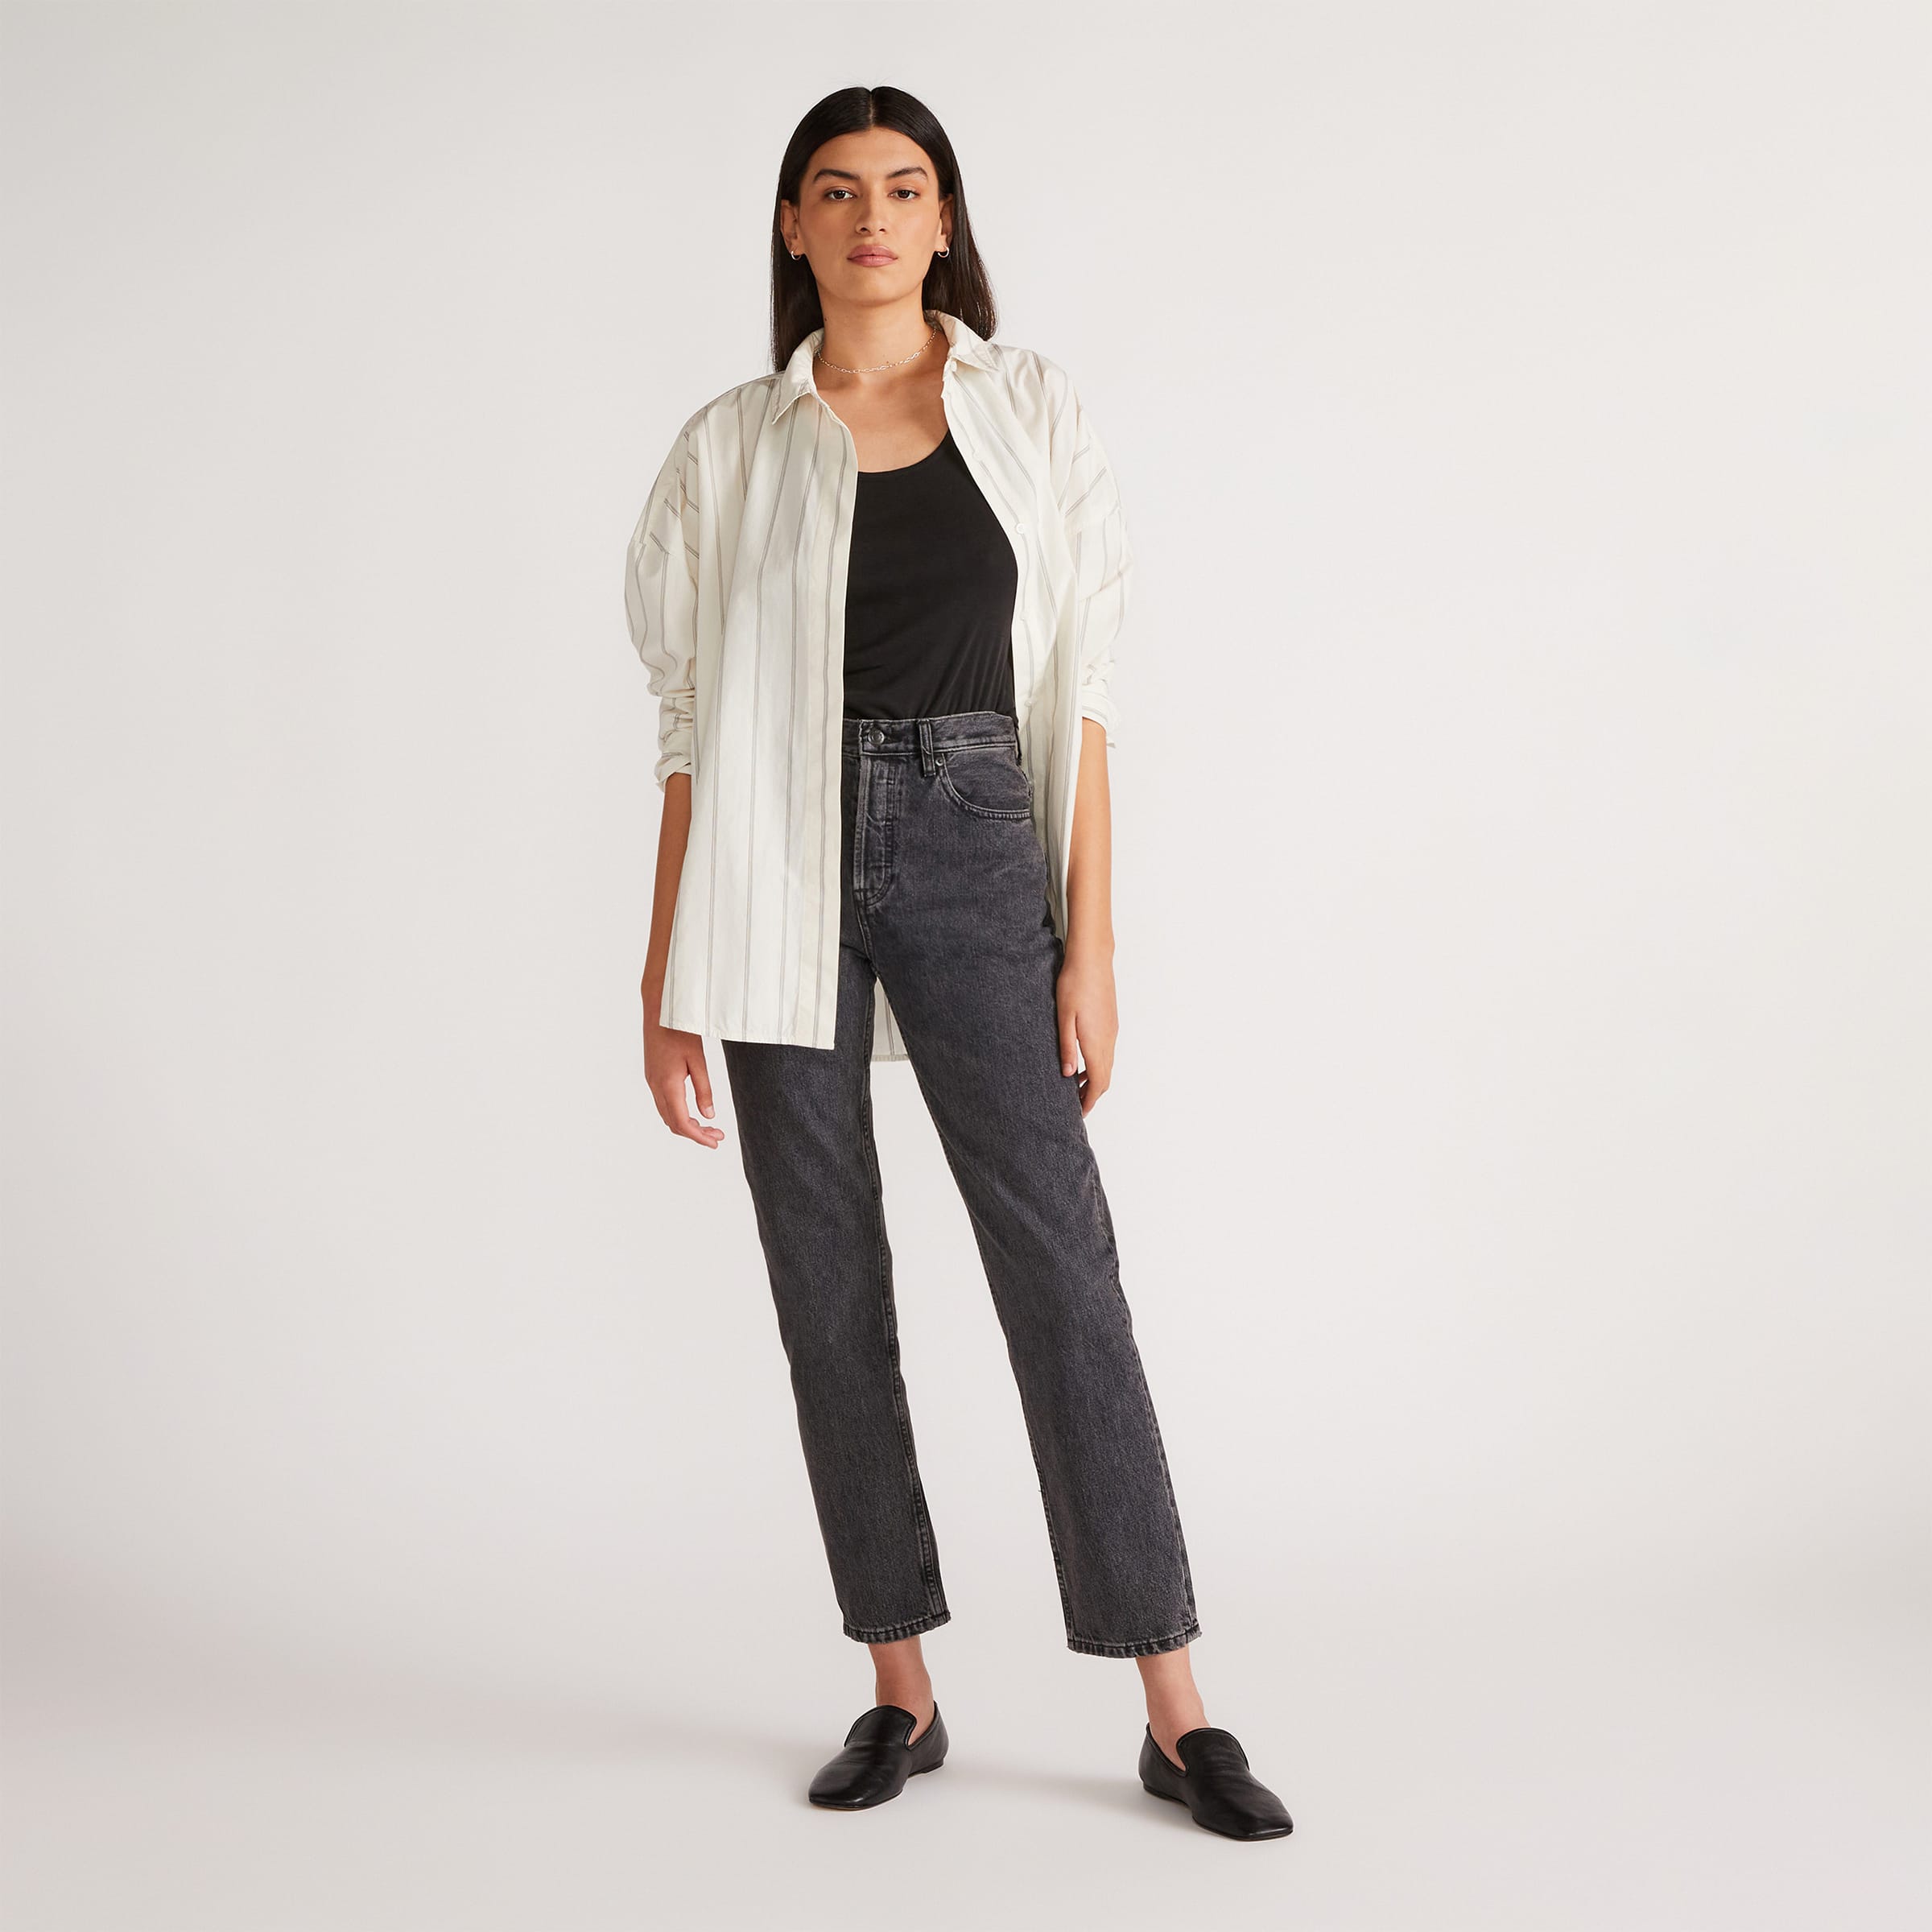 The Baggy Jean Ricky – Everlane